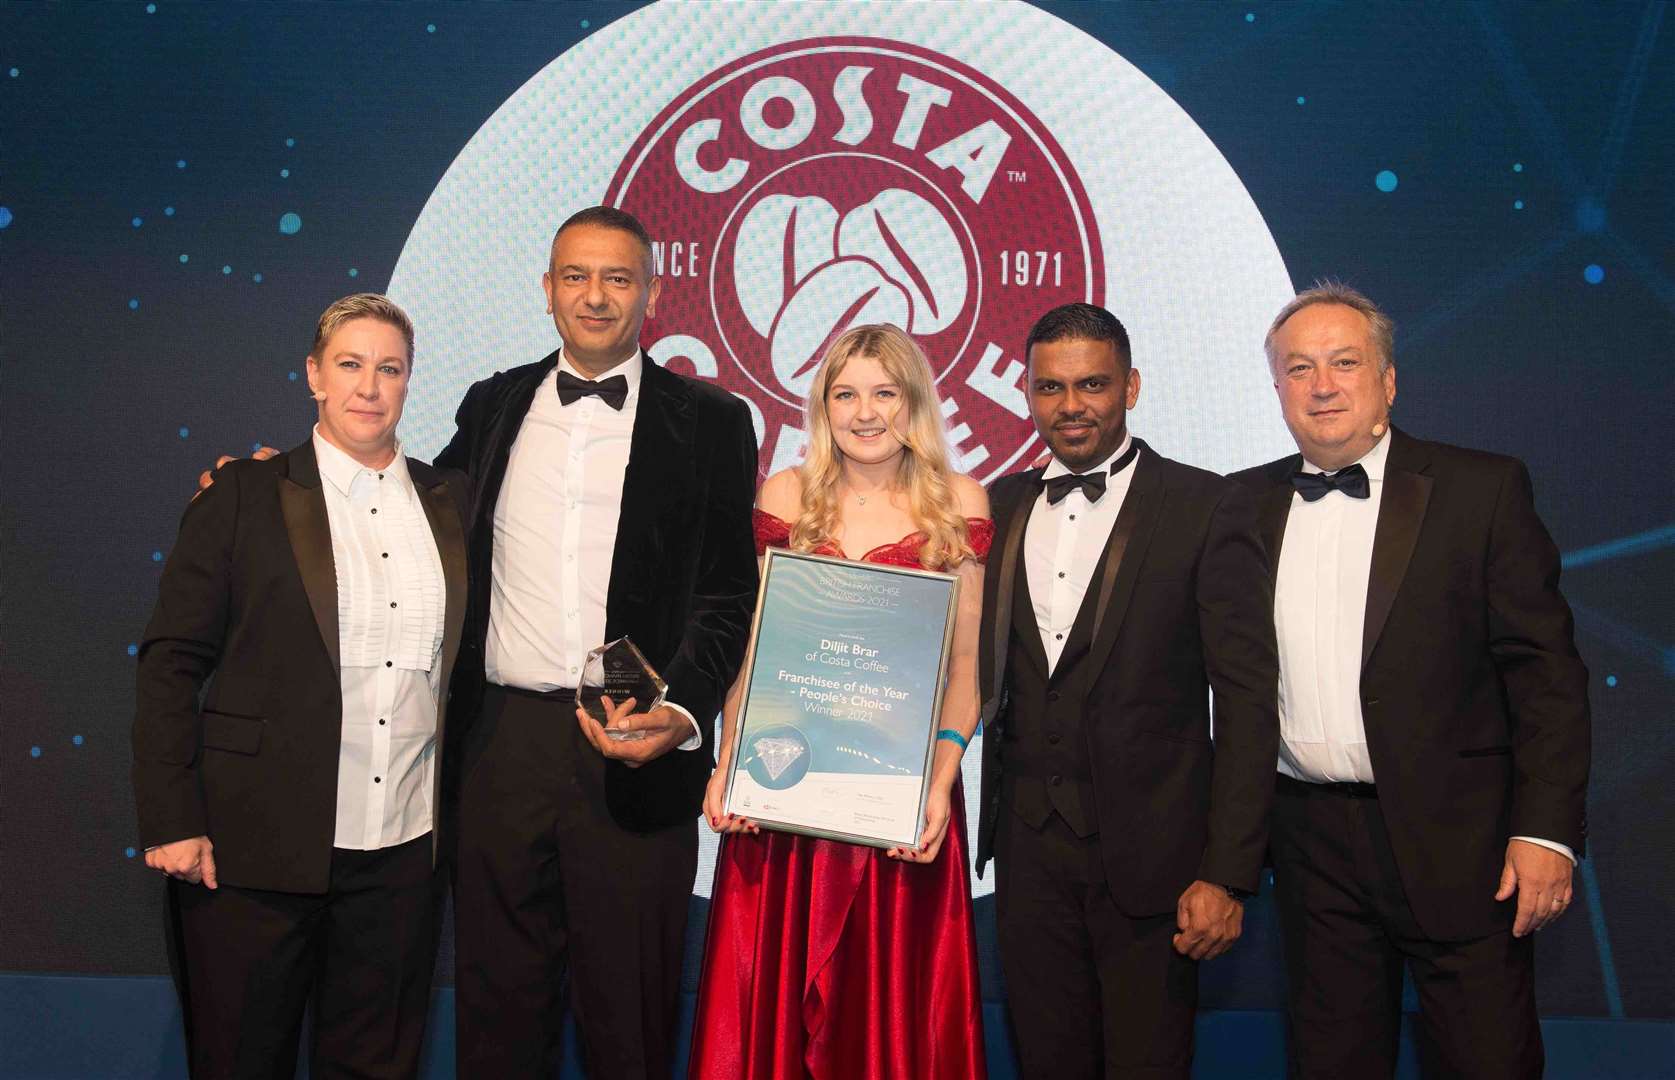 Goldex picks up an award for its work with Costa at the British Franchising Awards in December